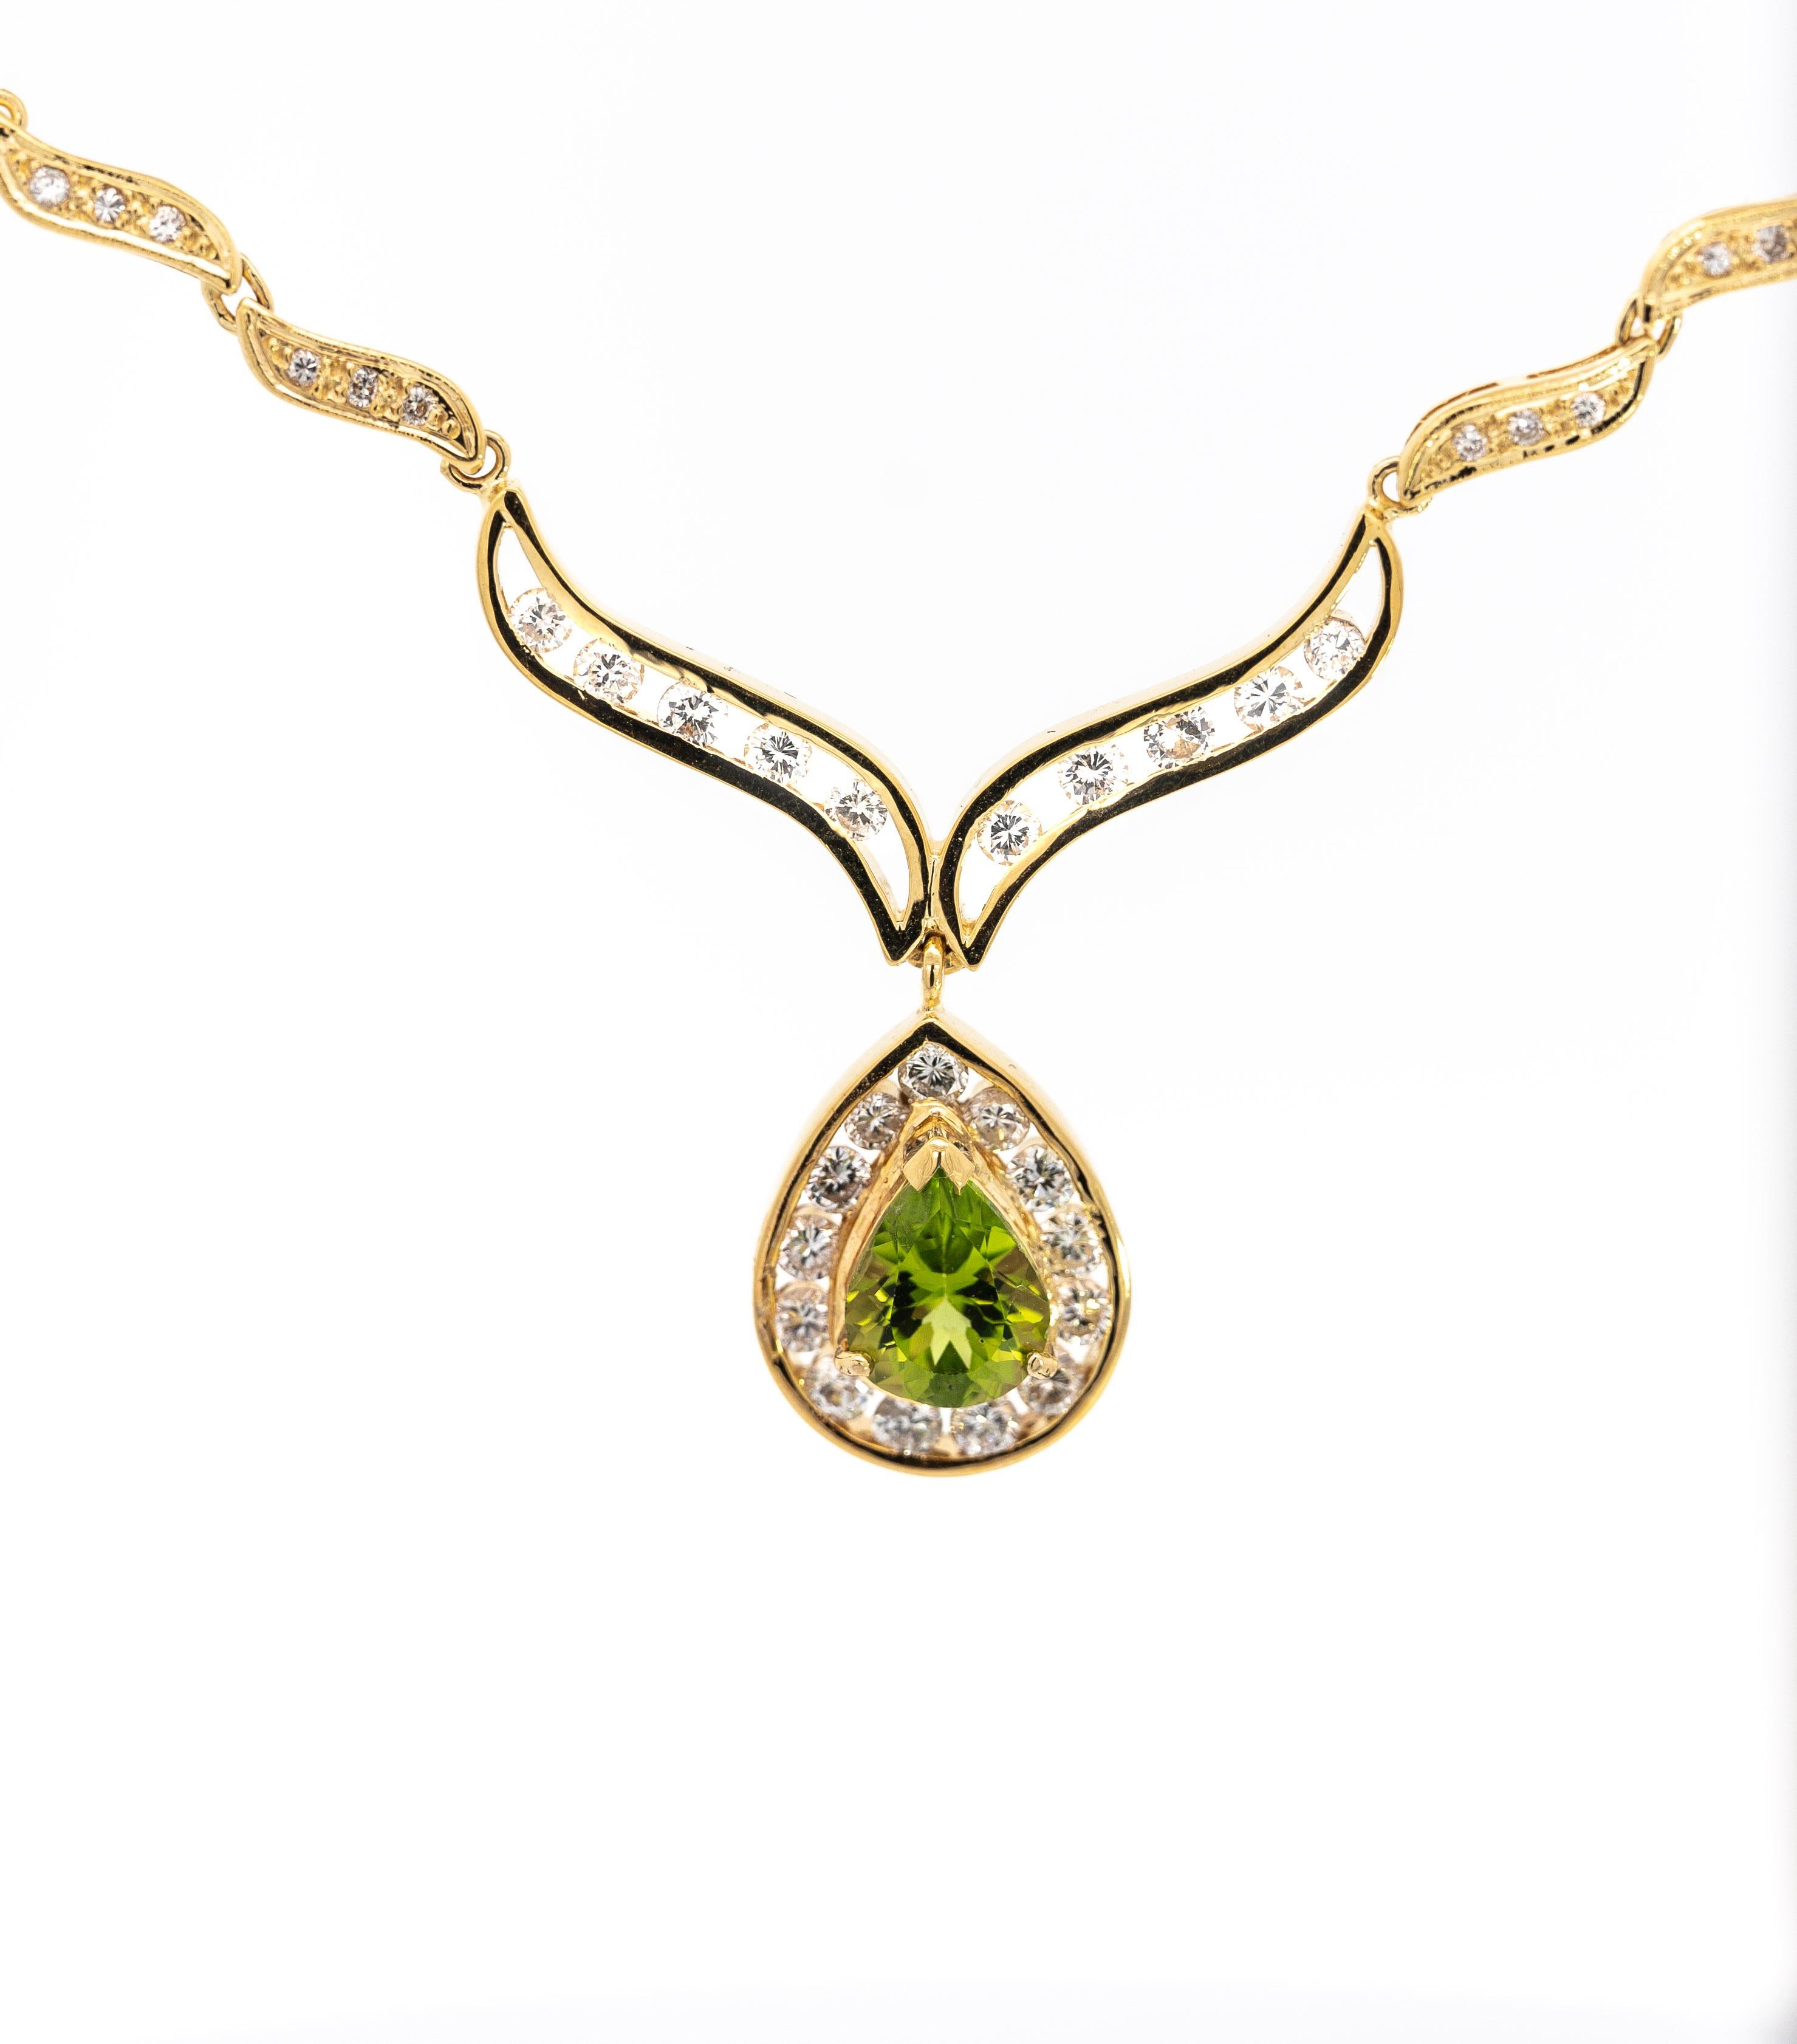 Vintage Pear Cut Green Peridot Drop Pendant Necklace with Diamonds in 18K Gold For Sale 4